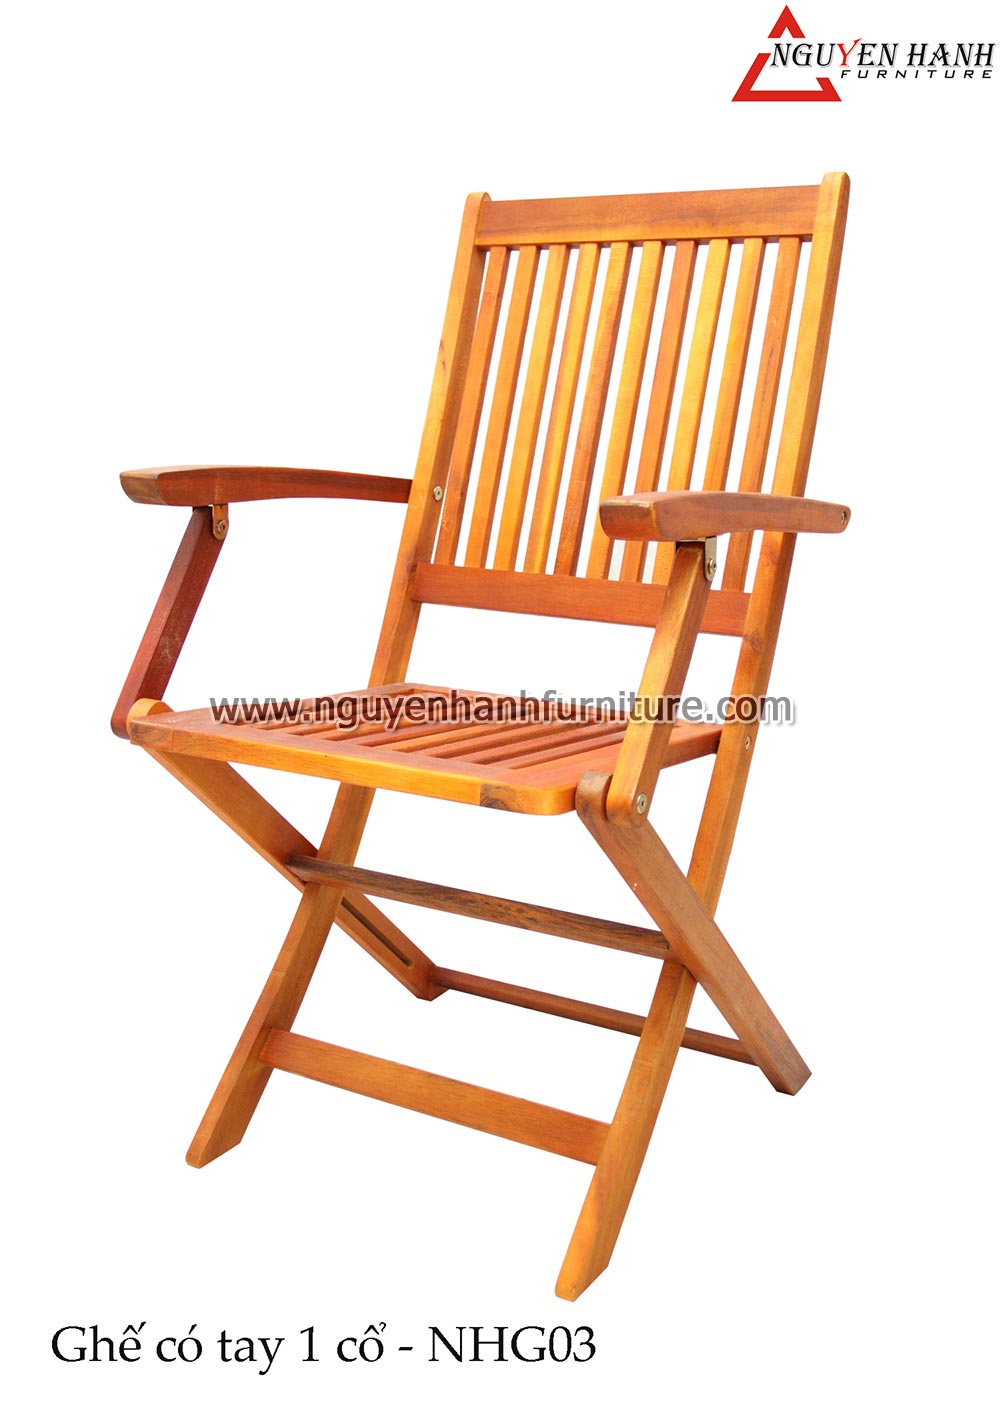 Name product: Wooden chair with single